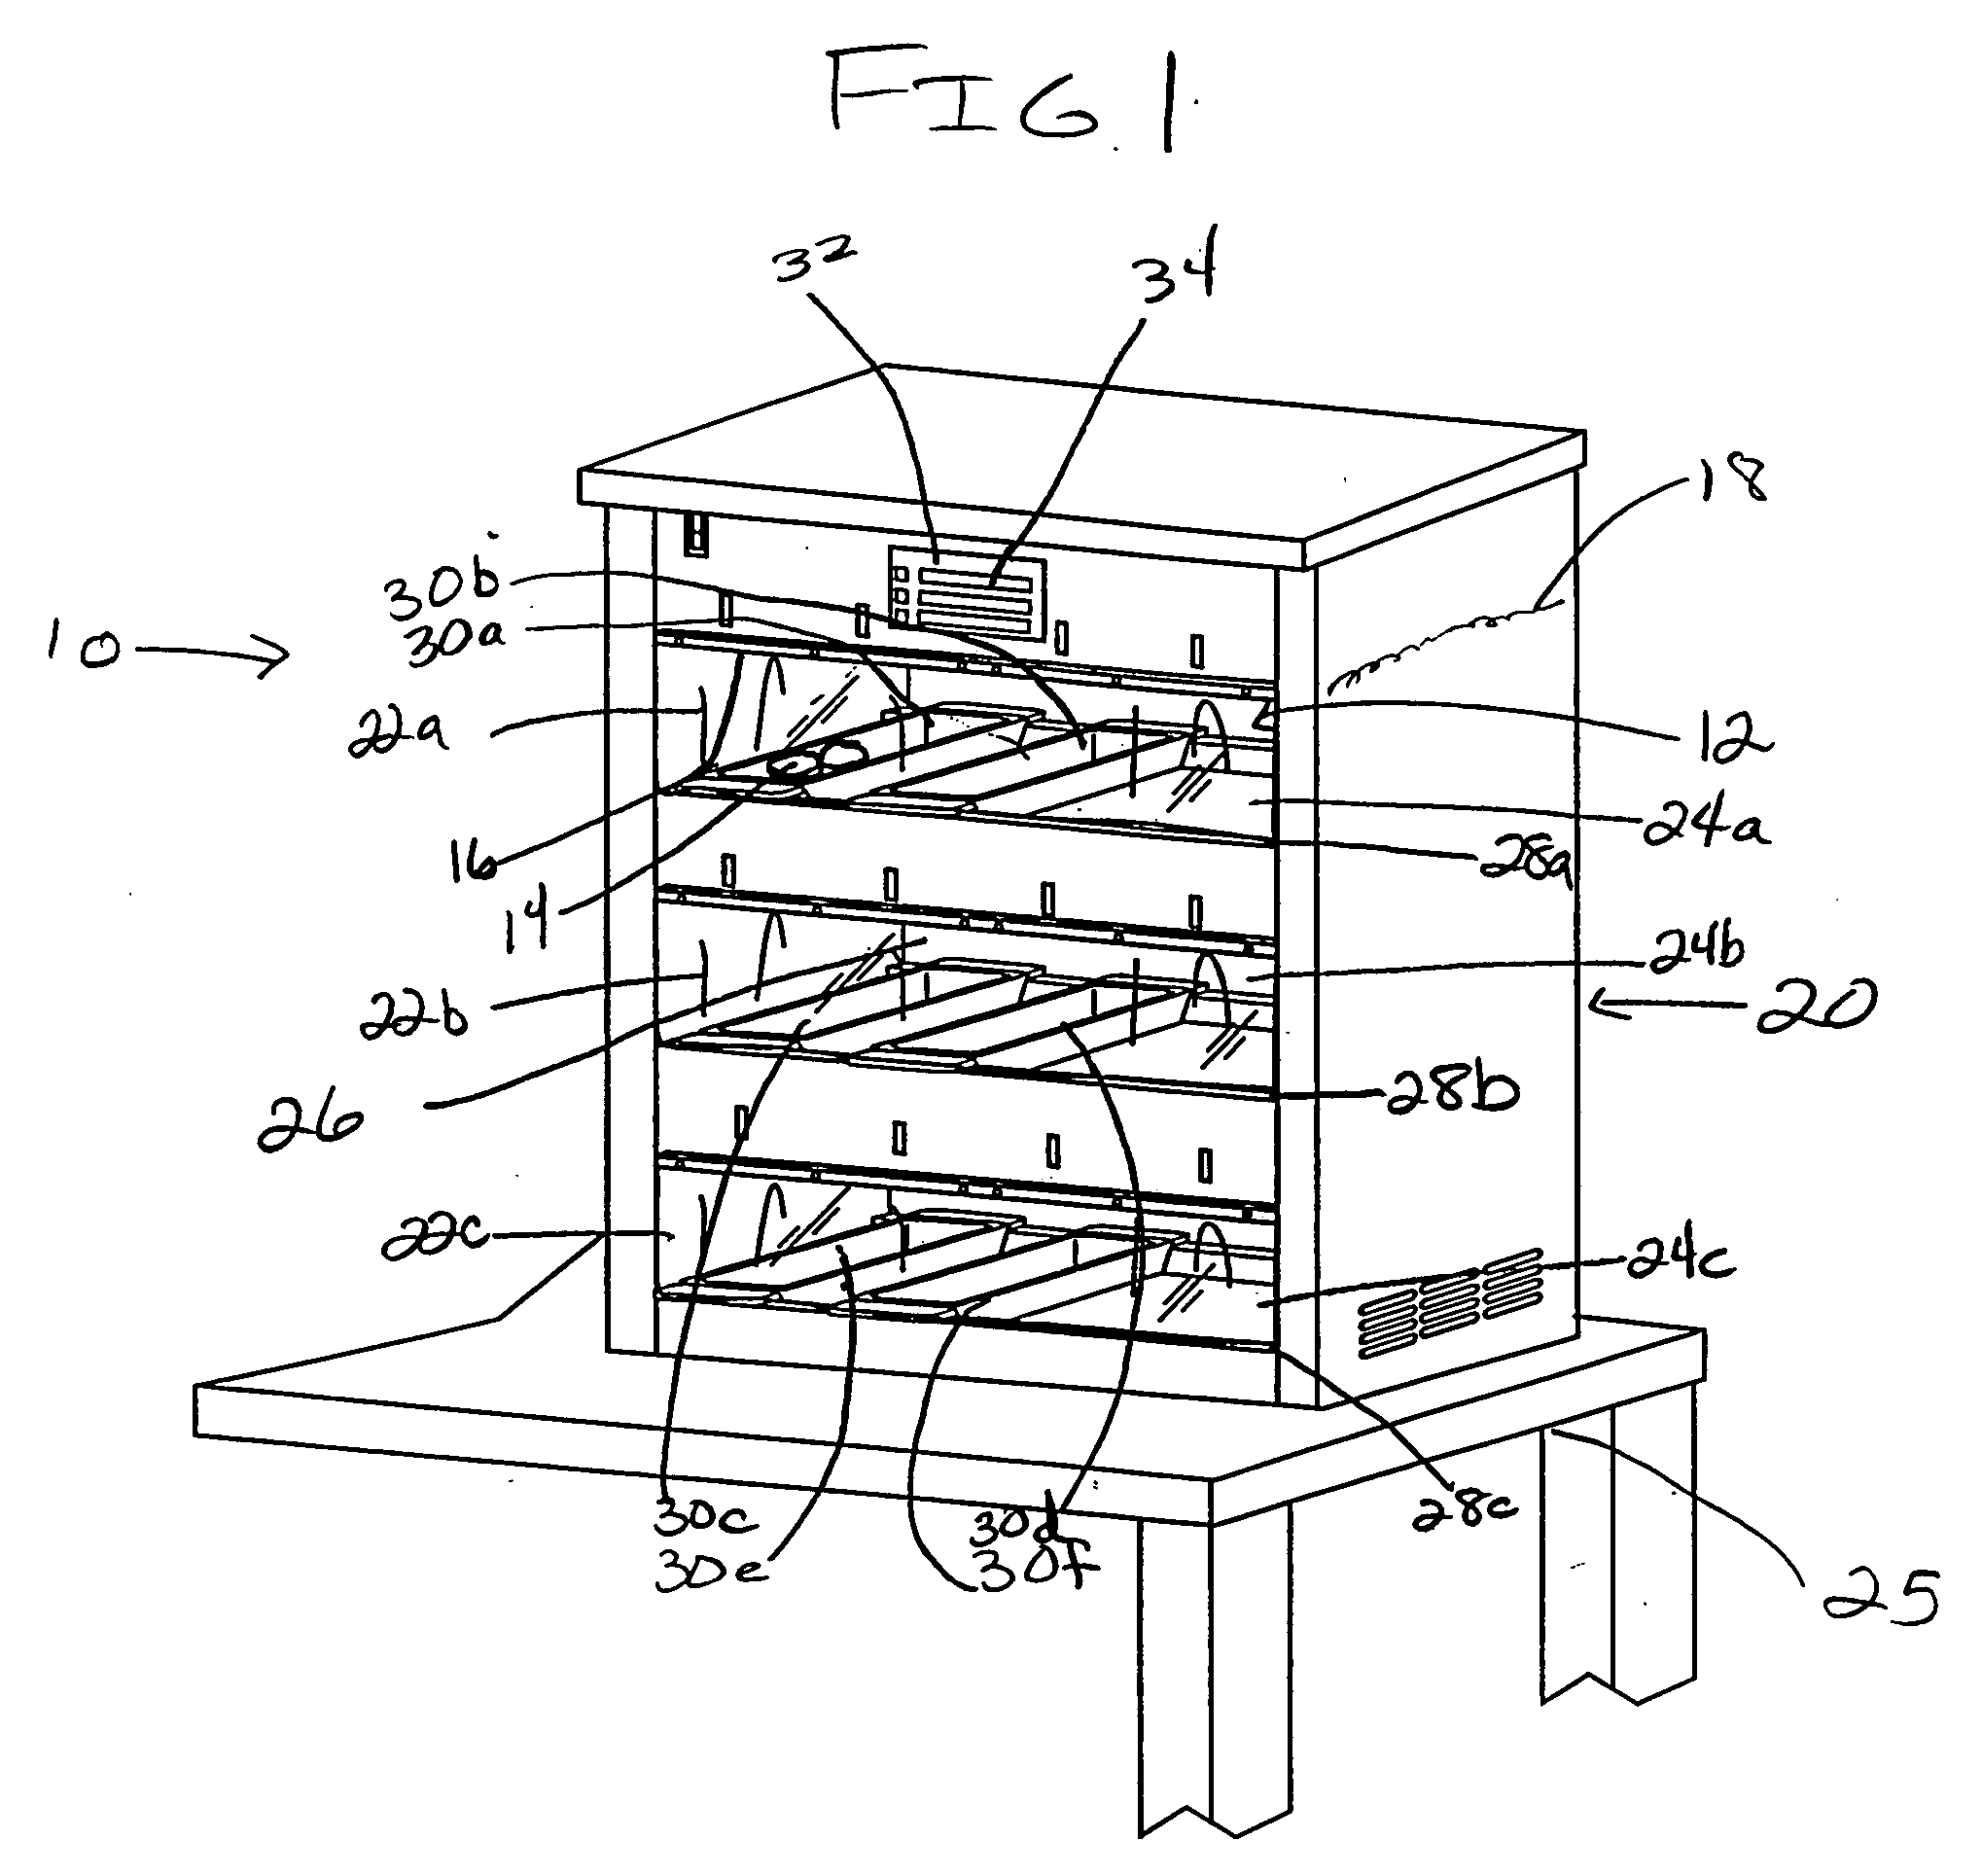 Food staging device, method of storing foods, and method of making a sandwich